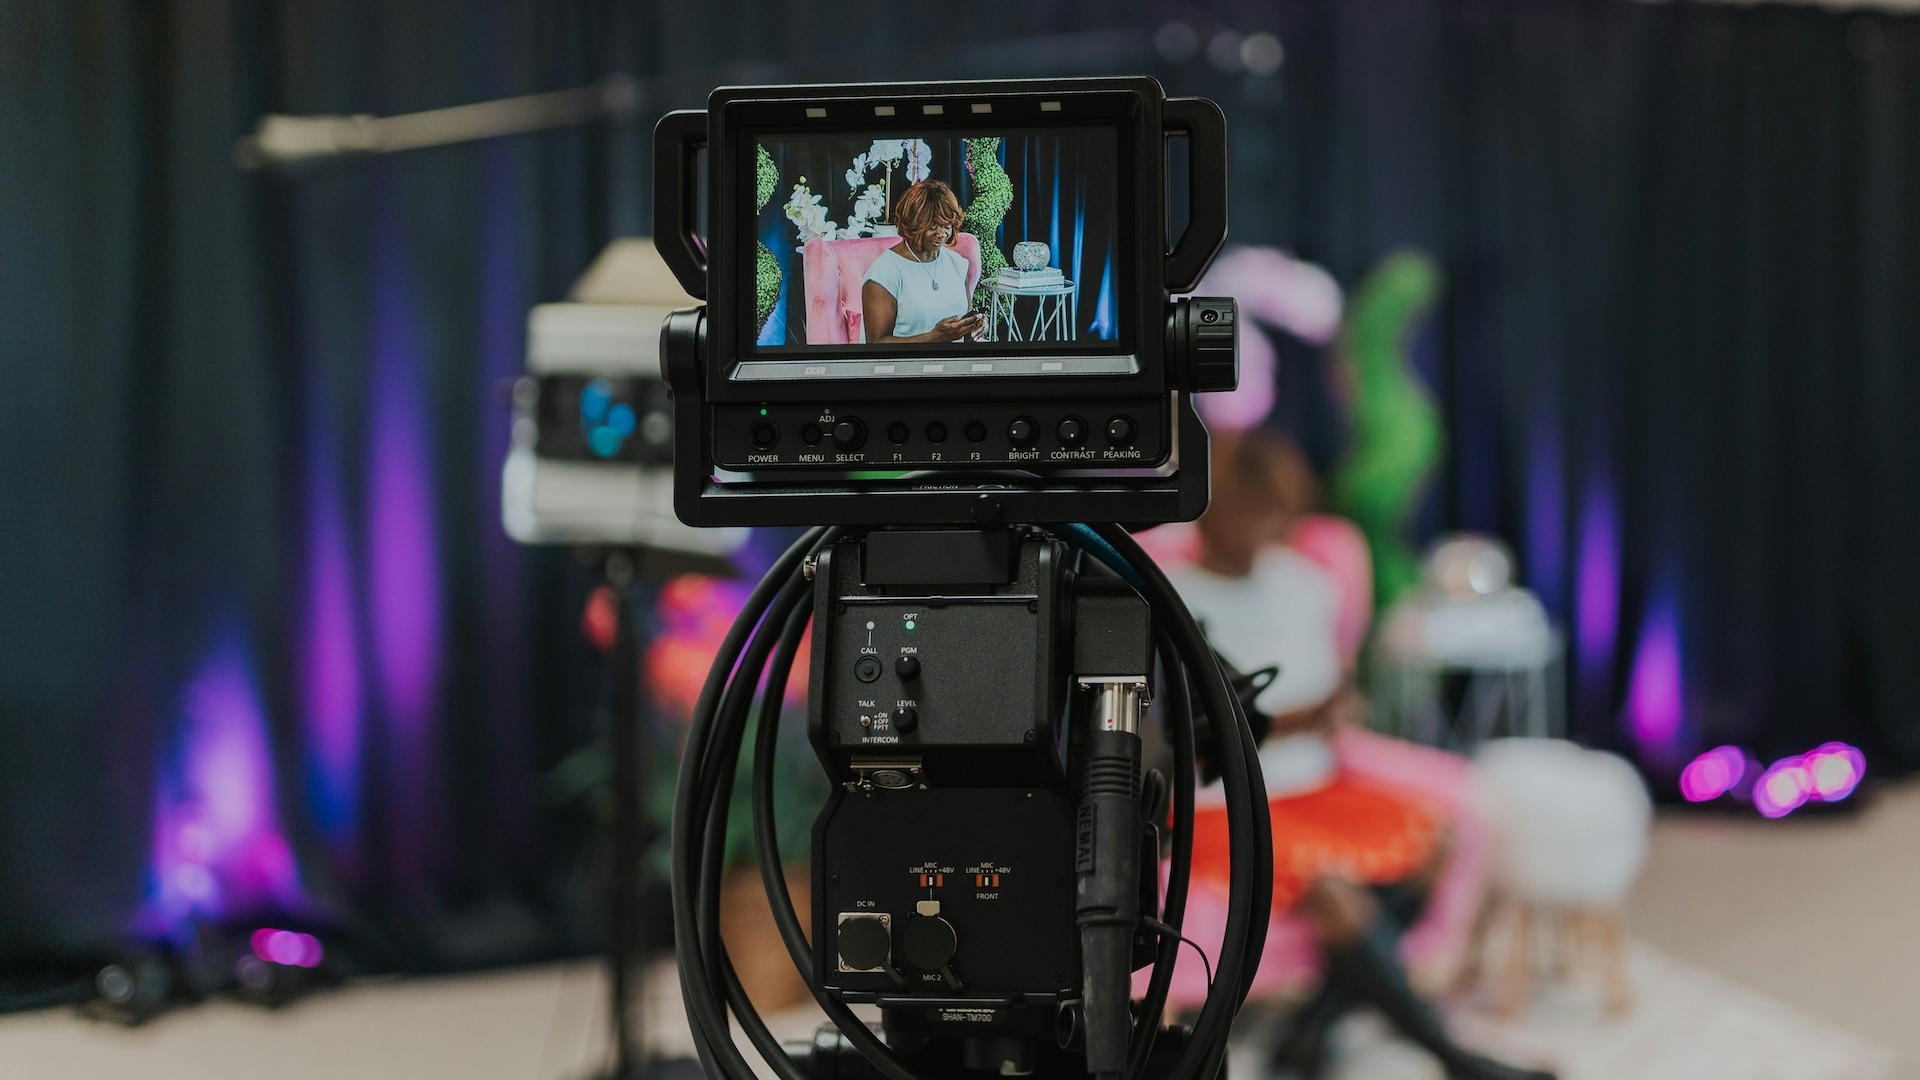 Want to get started with professional live streaming right now? This is what to do